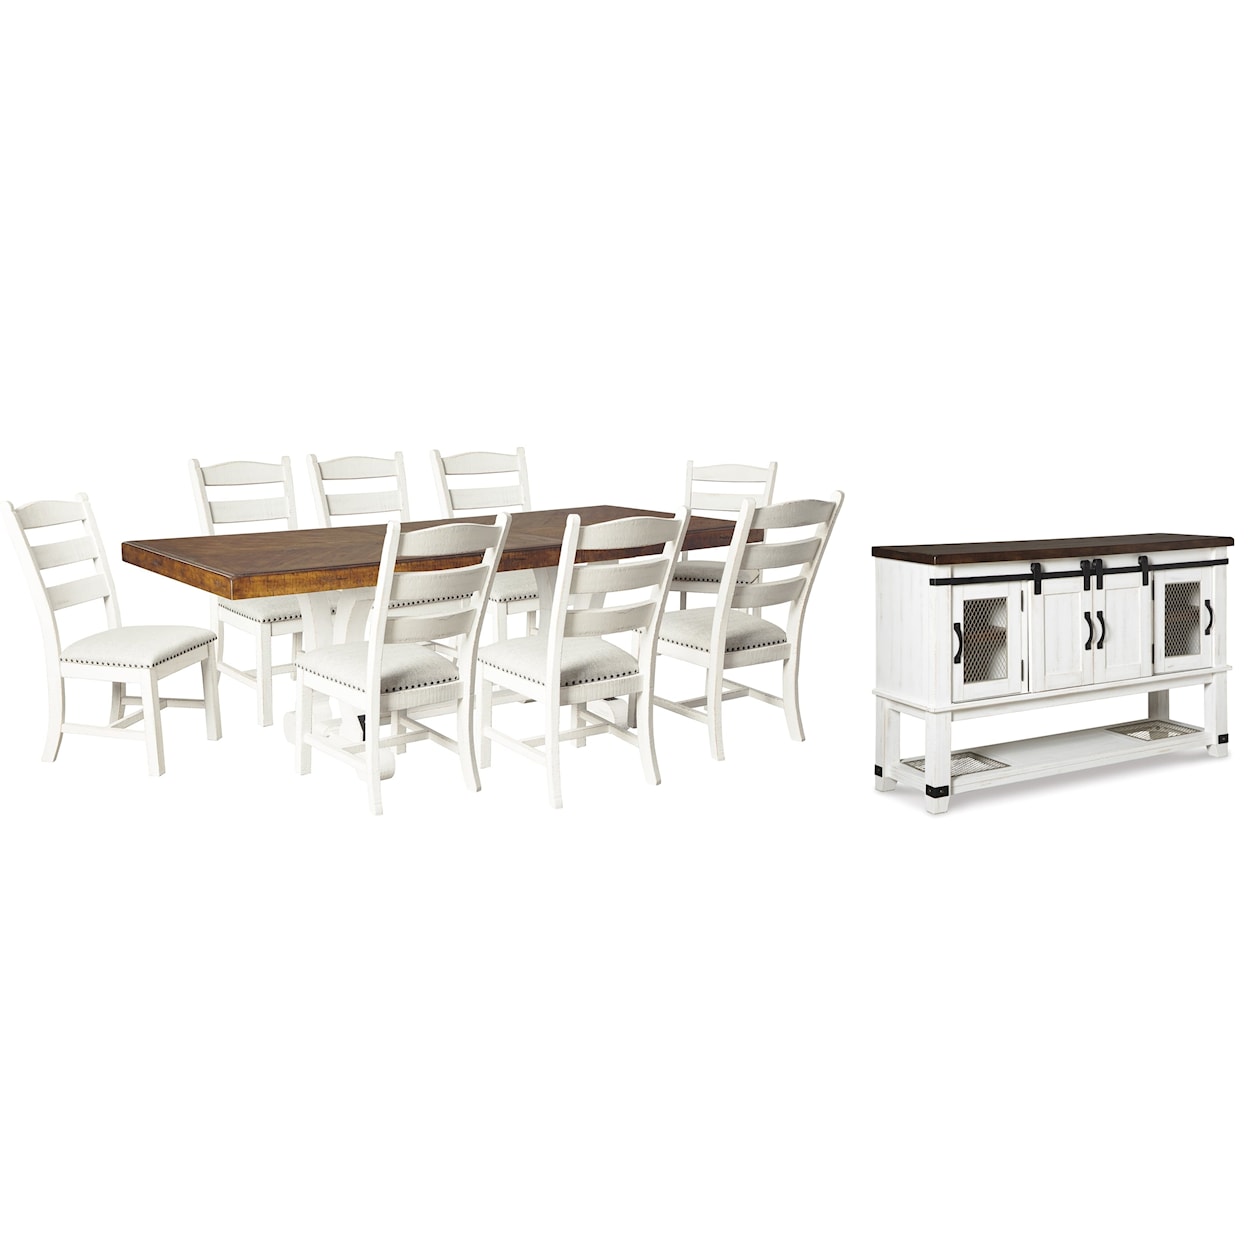 Benchcraft Valebeck Dining Table and 8 Chairs with Server